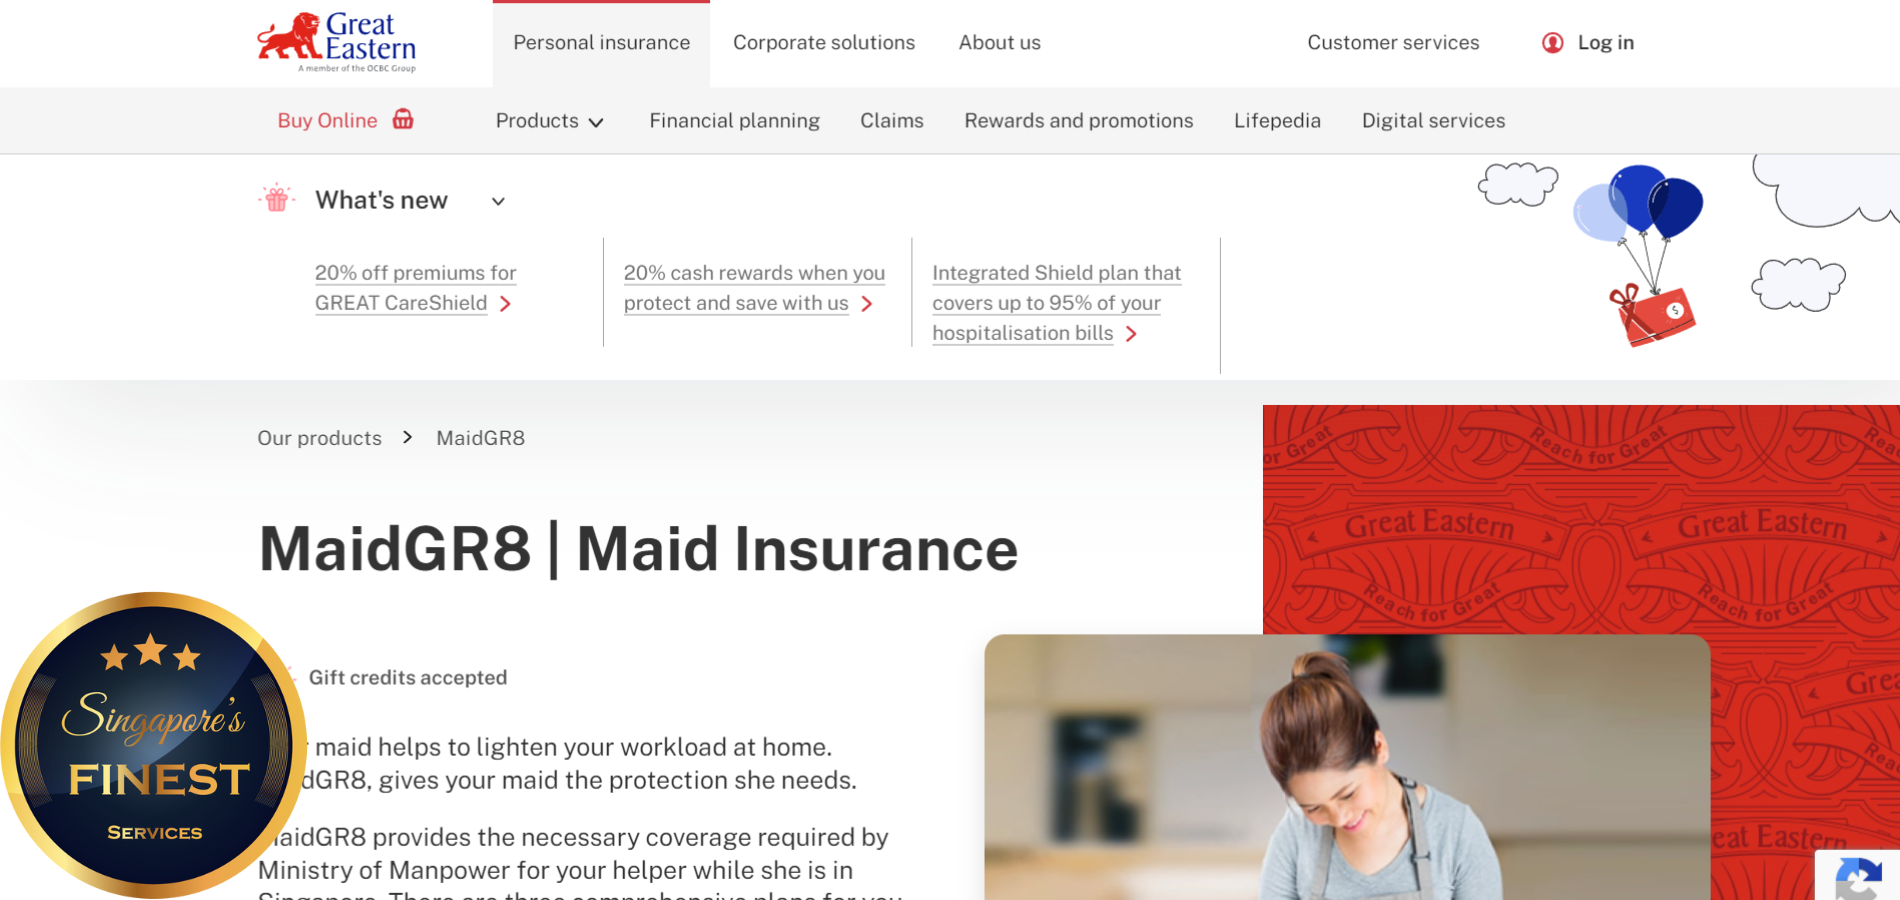 The Finest Maid Insurance Policies in Singapore